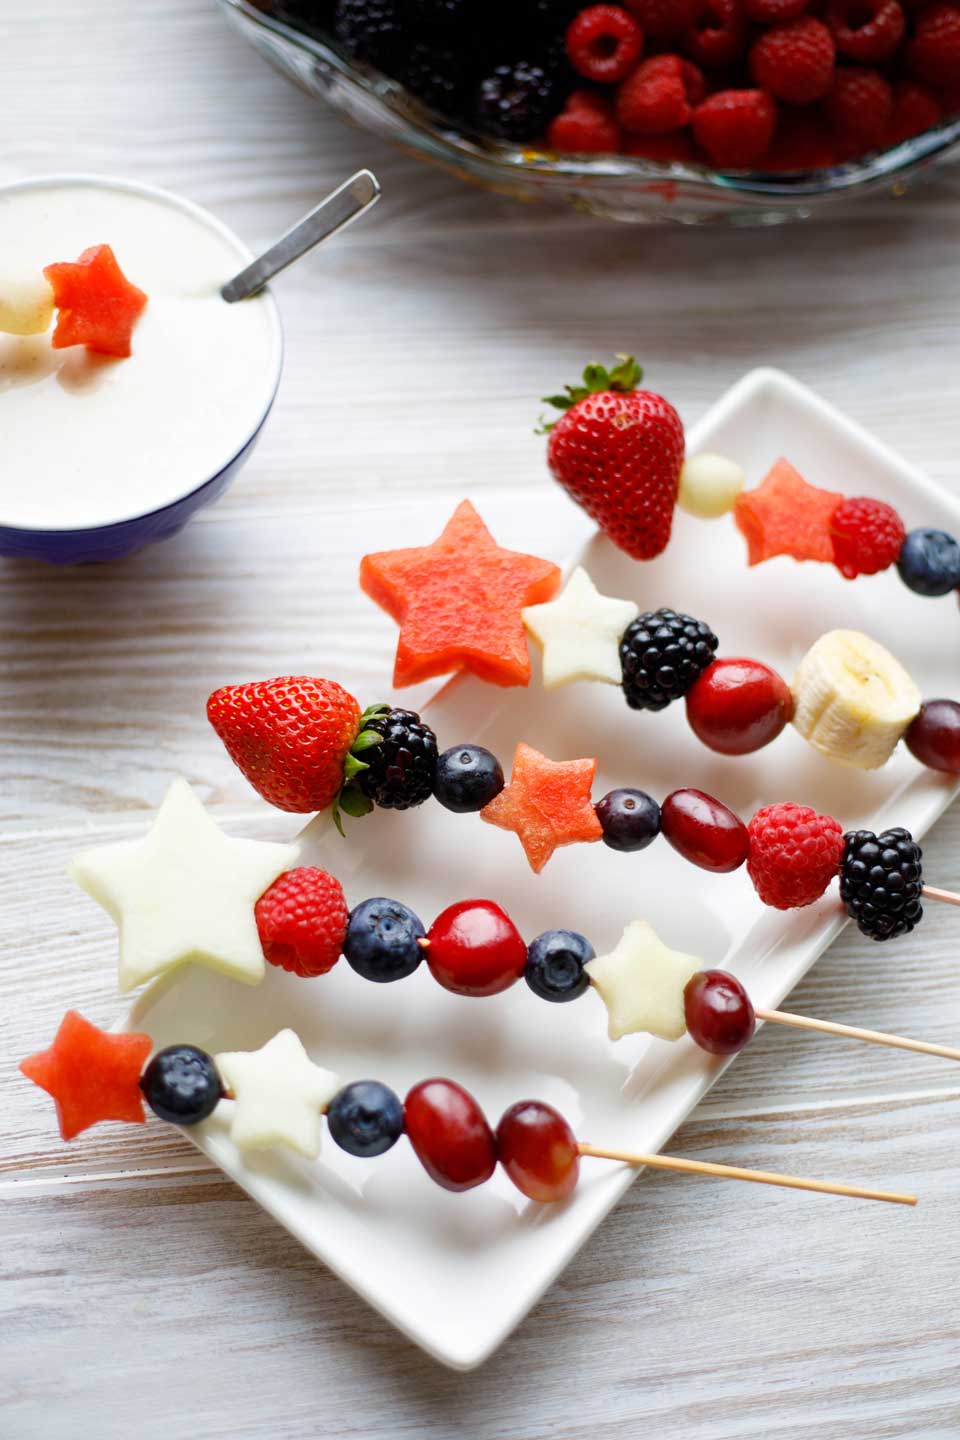 Easy and fun as appetizers or dessert! With our quick tips, you can serve Red, White and Blue Fruit Kabobs as a refreshing appetizer with sweet Yogurt Dip, or as a light but decadent dessert with cake and Chocolate Lava Dip! Plus fun serving ideas, too! Make these for all your summer picnics and BBQs ... from Memorial Day to 4th of July to Labor Day! #picnic #patriotic #redwhiteandblue #fruit #kabobs #appetizer #healthy #dessert #partyfood #4thofJuly #fourthofjuly | www.TwoHealthyKitchens.com